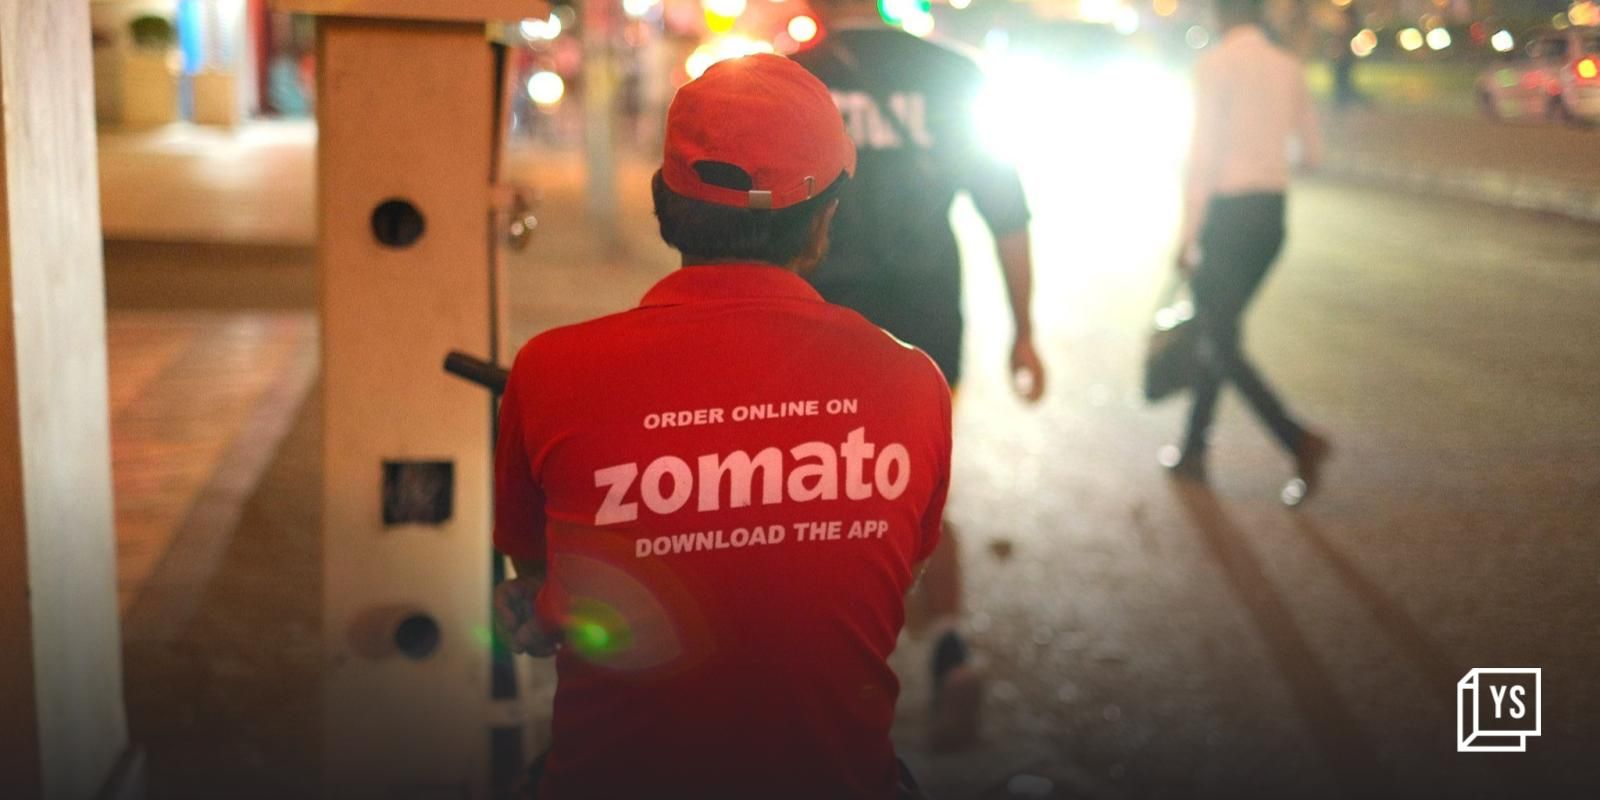 Zomato’s Q3 net profit zooms 283% QoQ to Rs 138 Cr led by growth in food delivery, Hyperpure